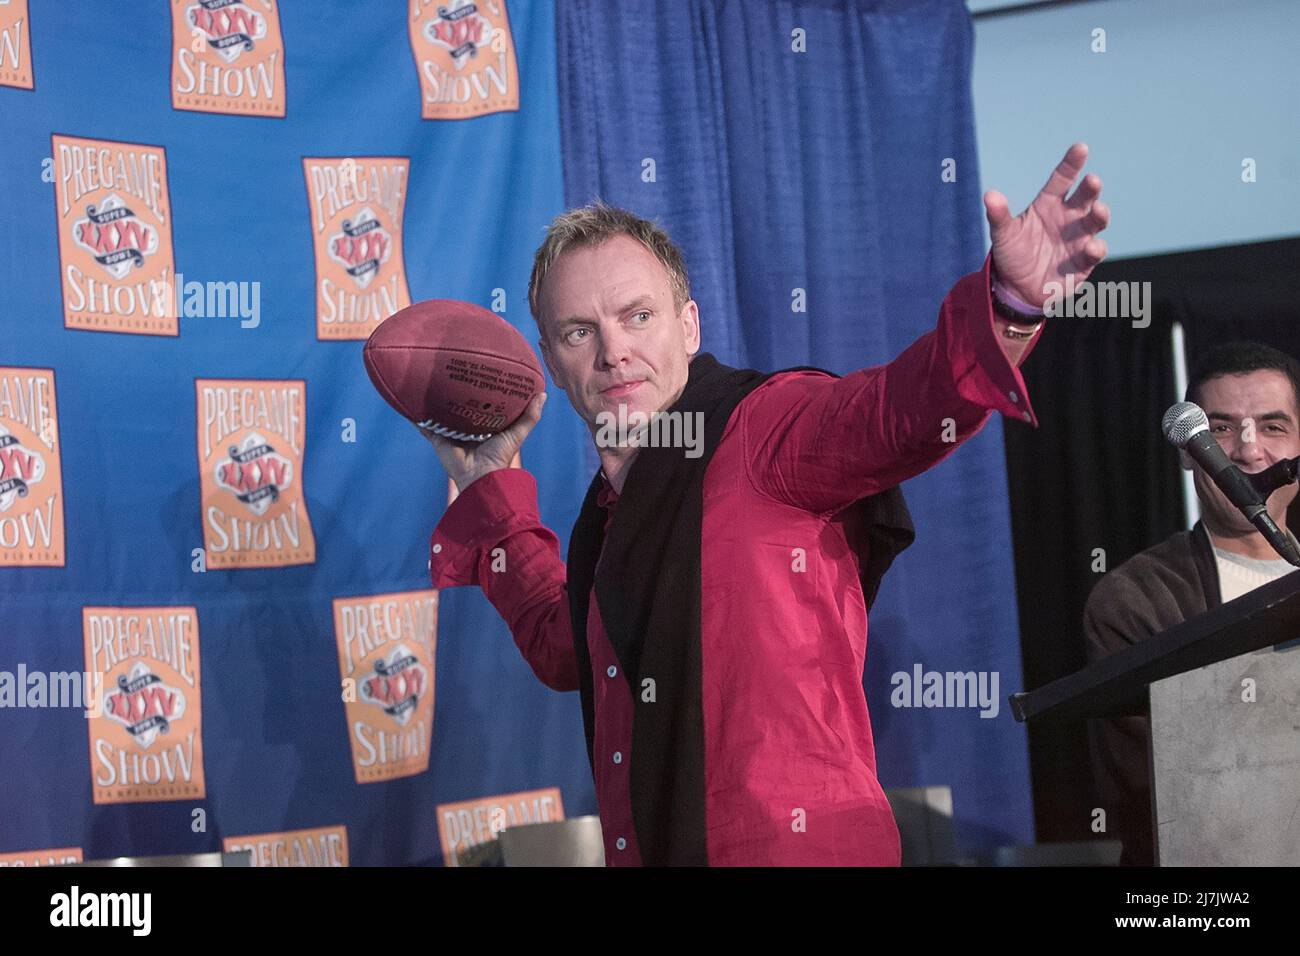 Singer Sting - Gordon Sumner poses with a football during a Super Bowl press Conference on January 26, 2001 in Tampa, FL. Photo credit: Francis Specker Stock Photo